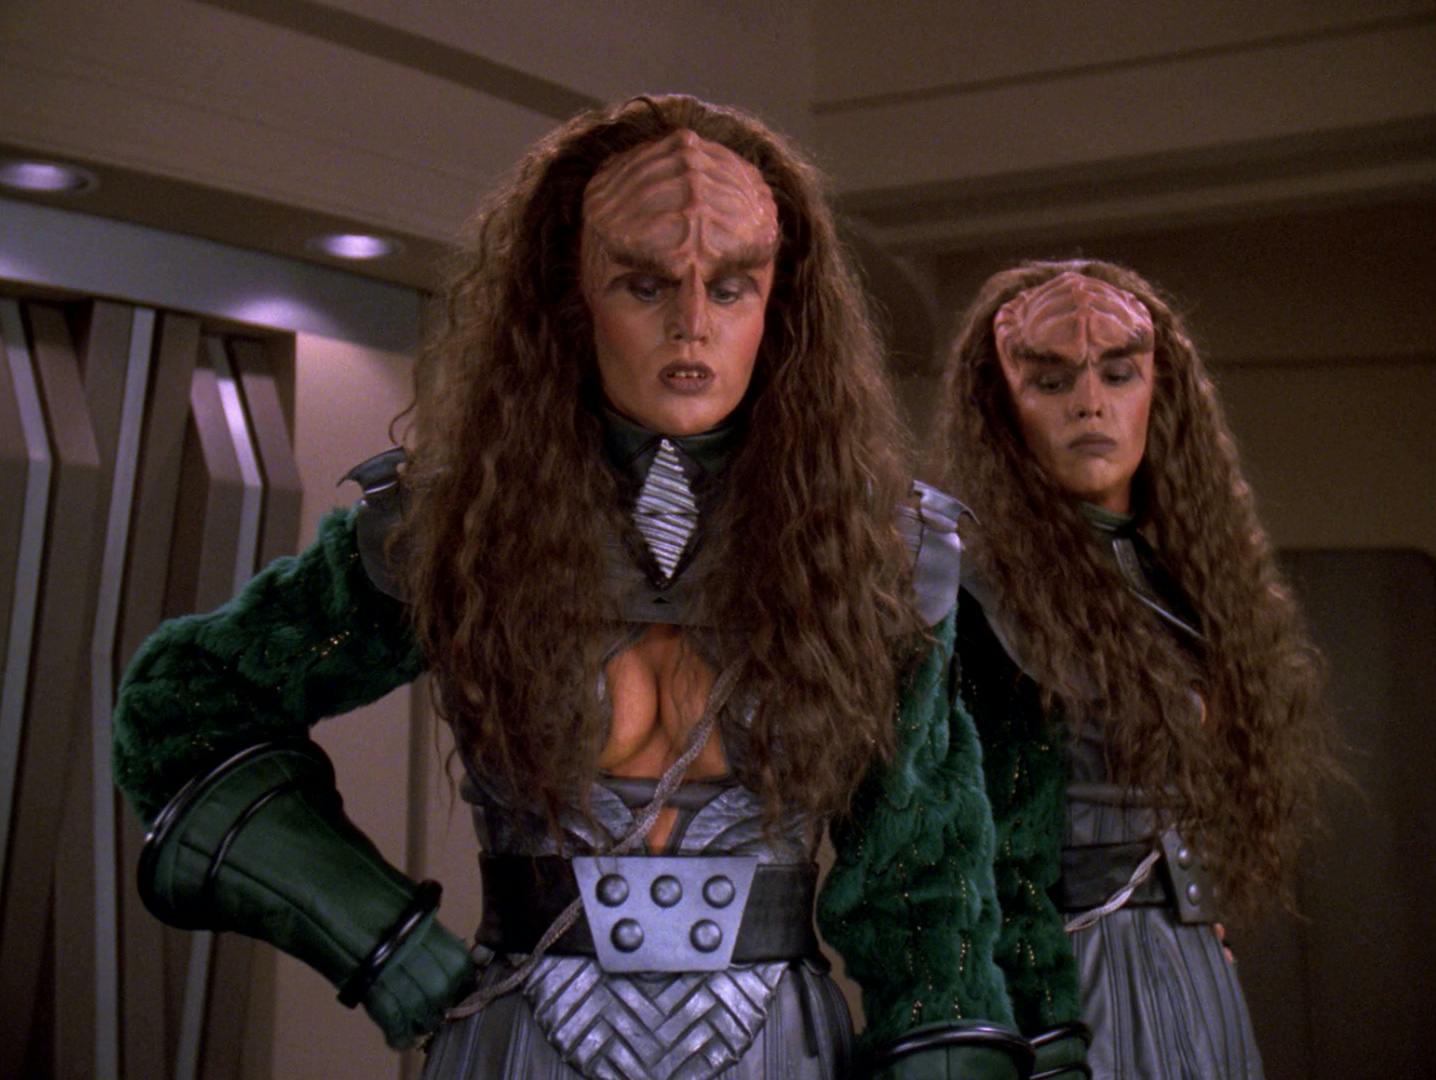 The Duras sisters Lursa and B'Etor in 'Firstborn'